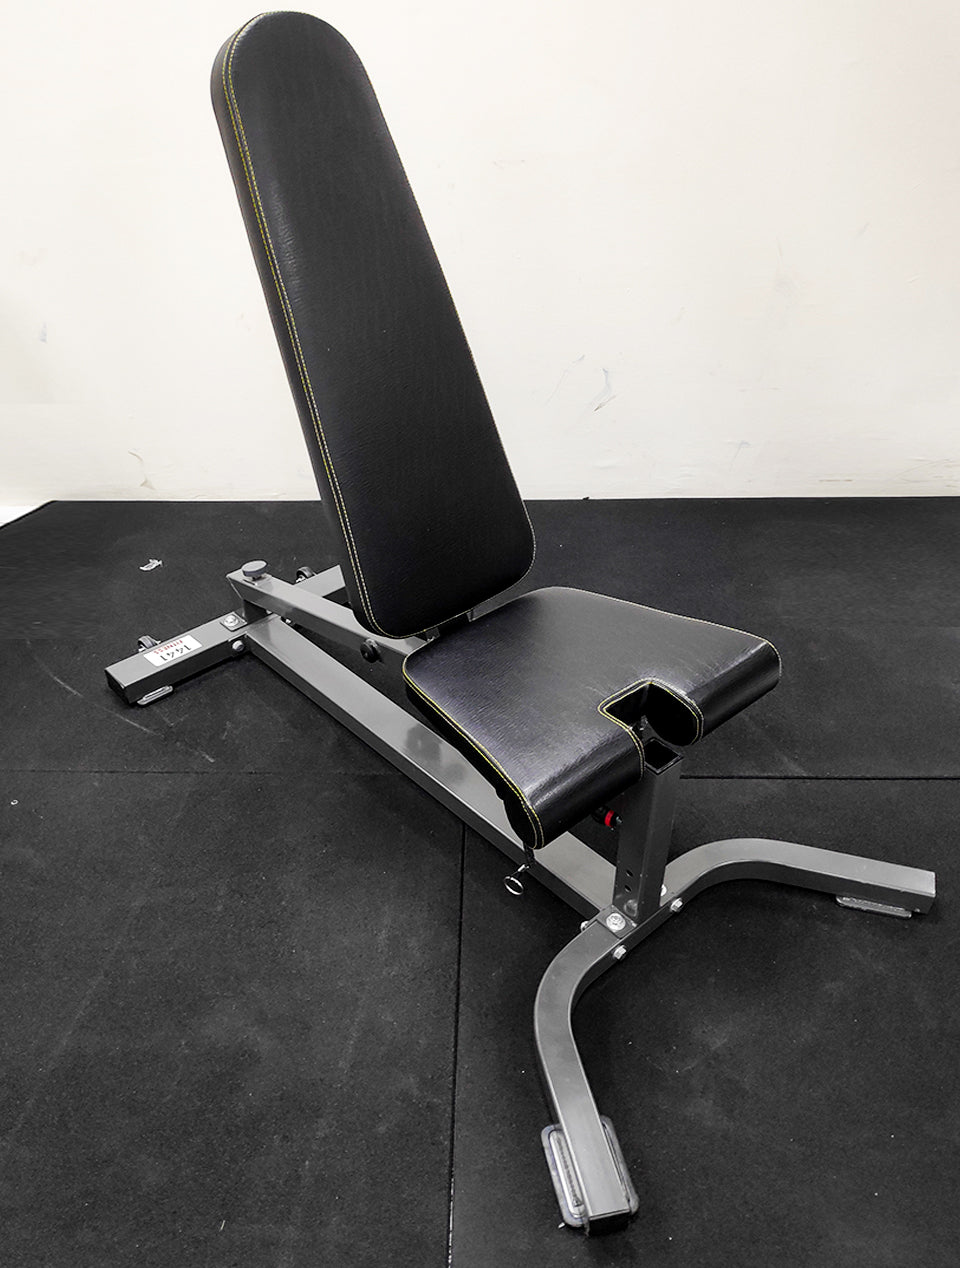  Adjustable Commercial Bench with Preacher Curl Extension